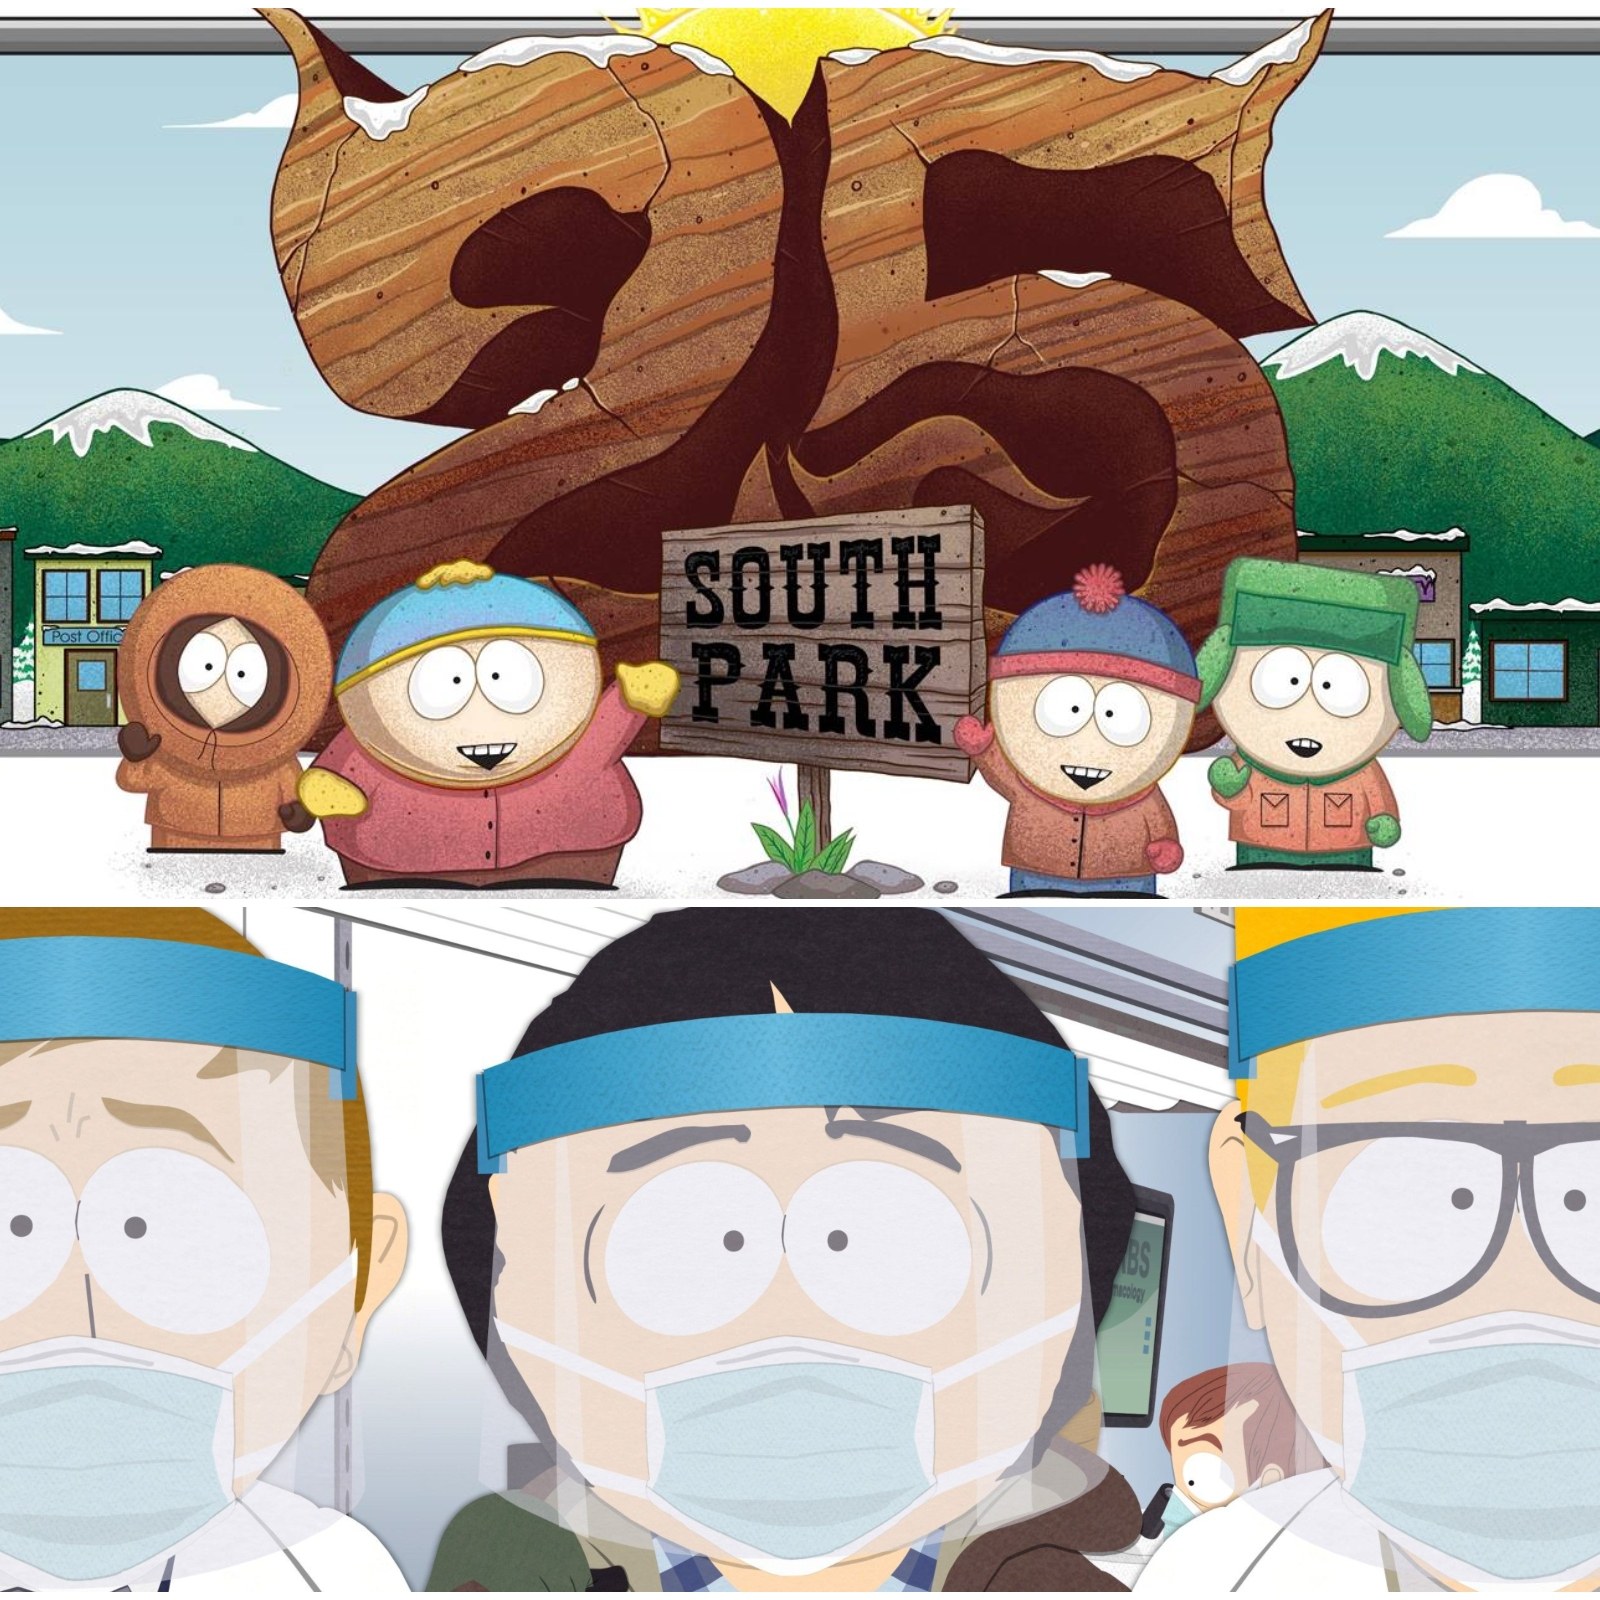 When 'South Park' Season 25 Airs on Comedy Central